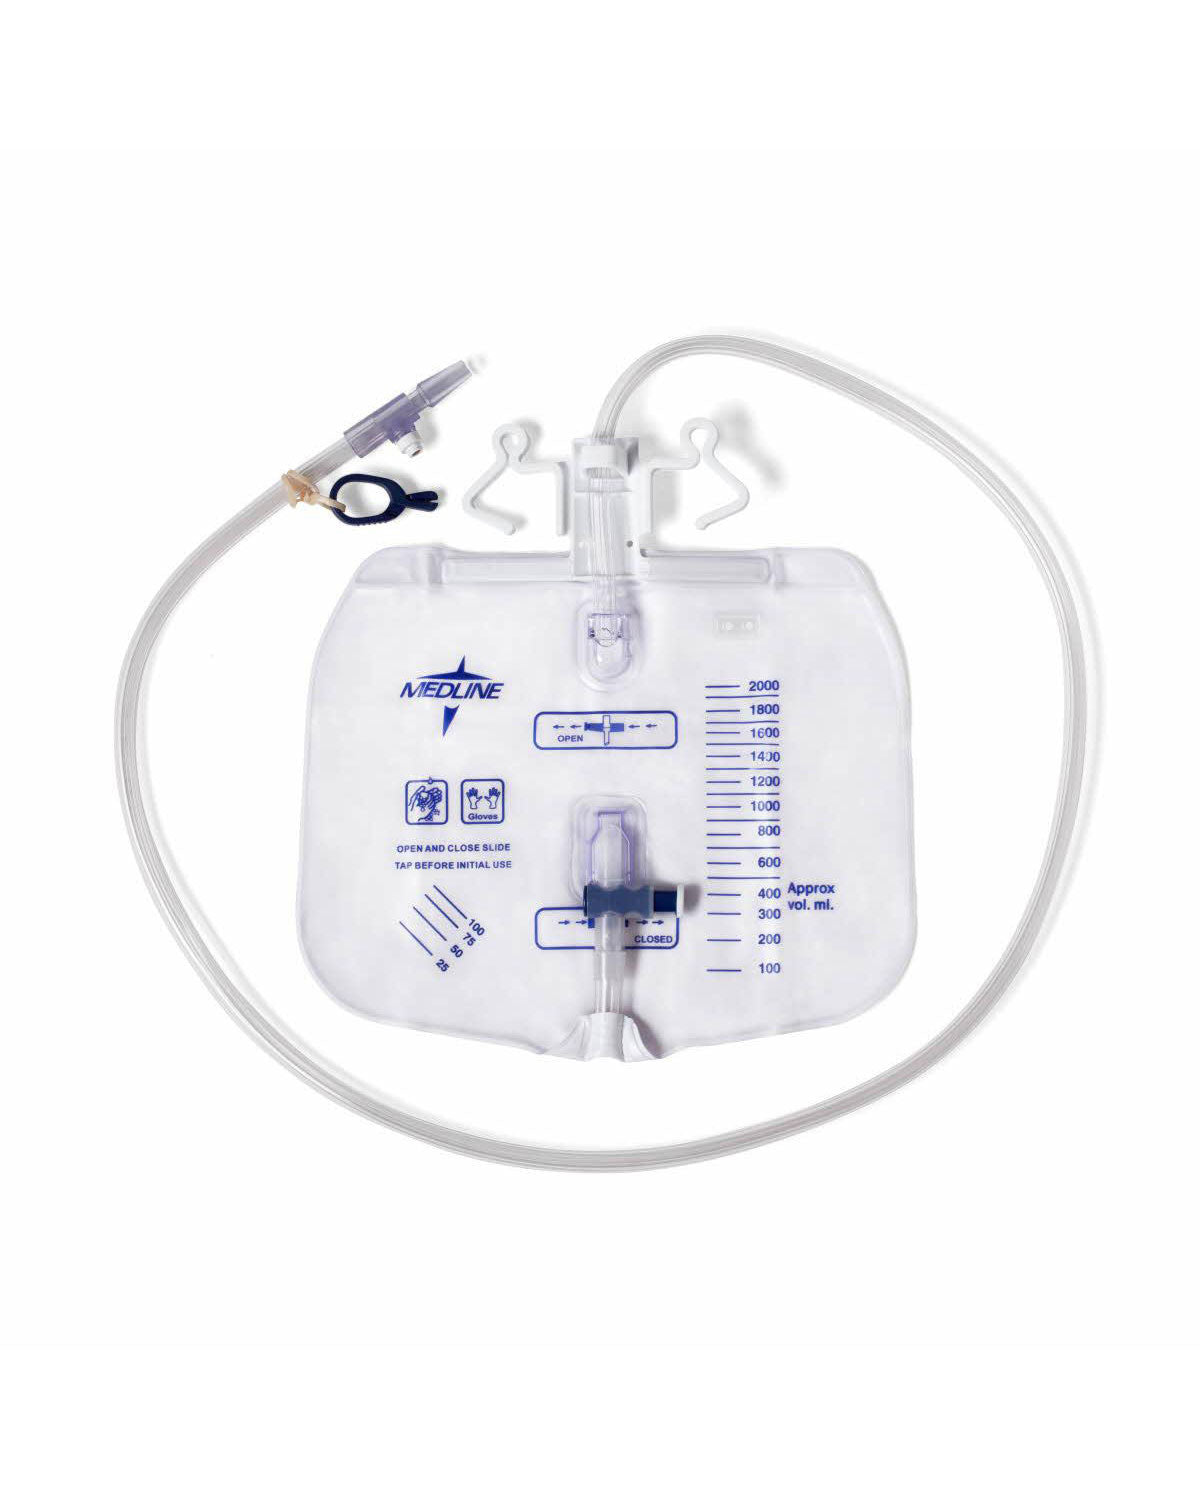 Medline Urinary Drain Bag with Anti Reflux and Metal Clamp 4000ml - 1 each